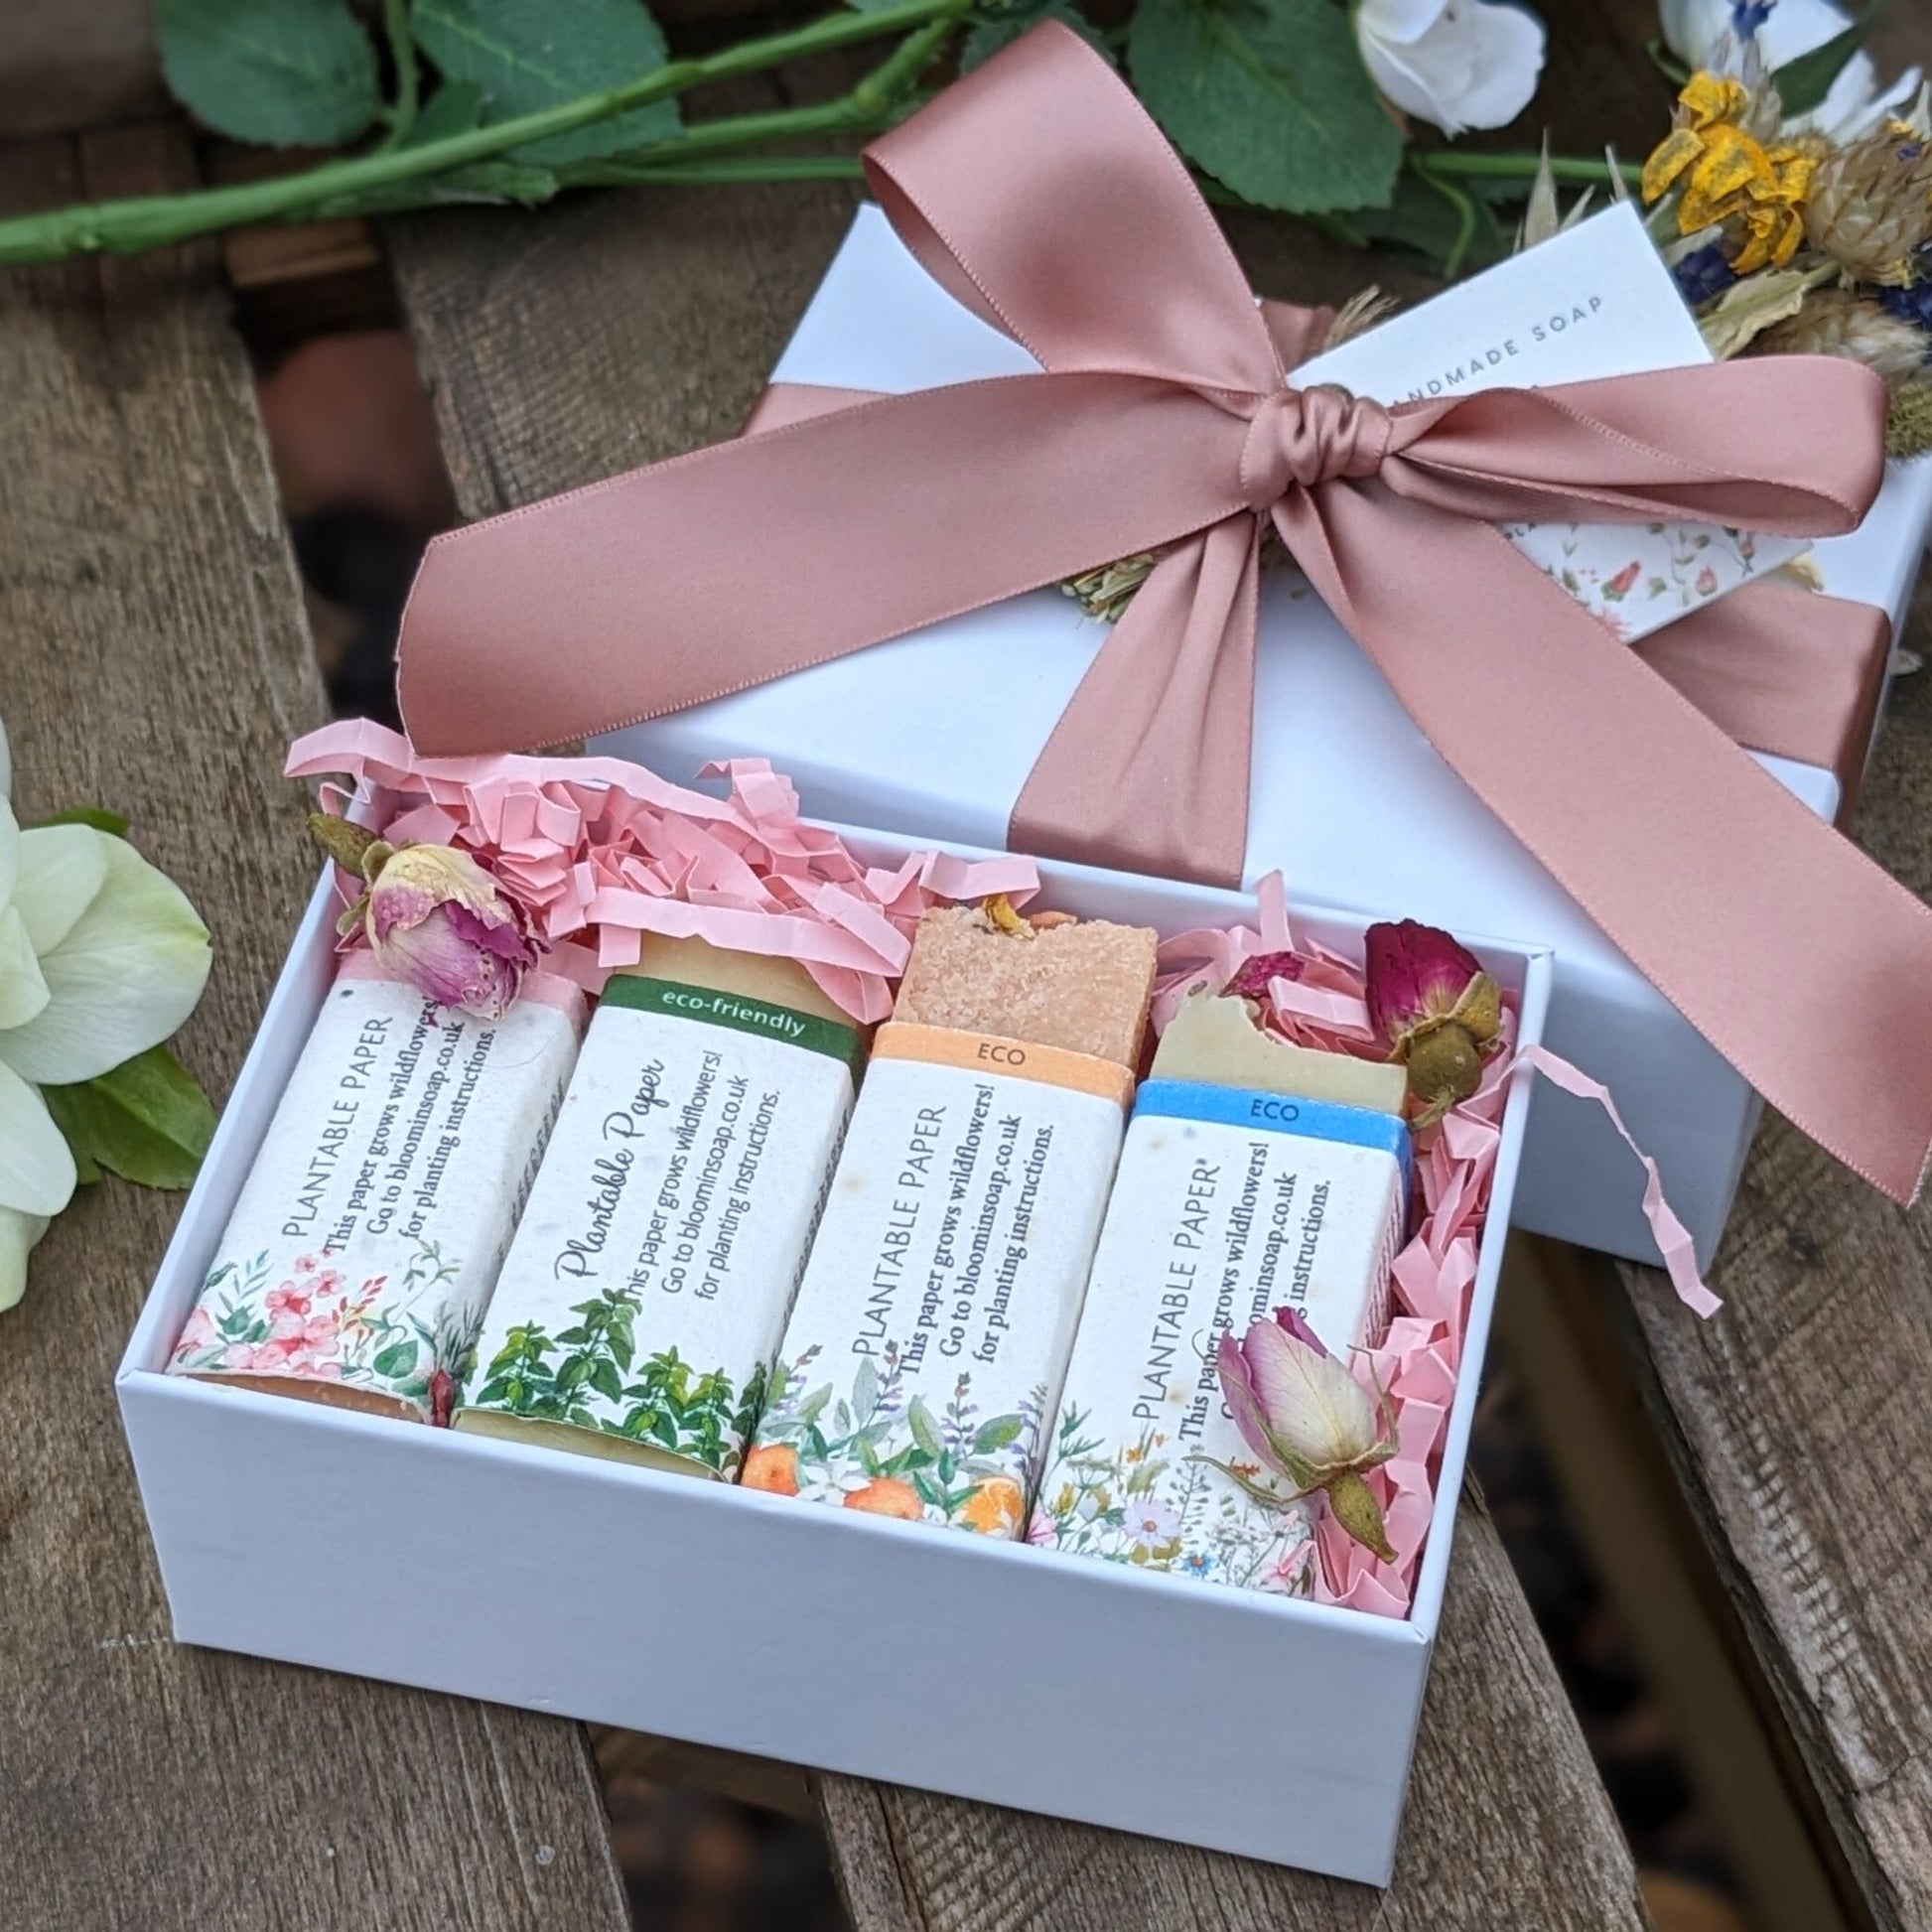 Soap Lover's Gift Box with four handmade soaps